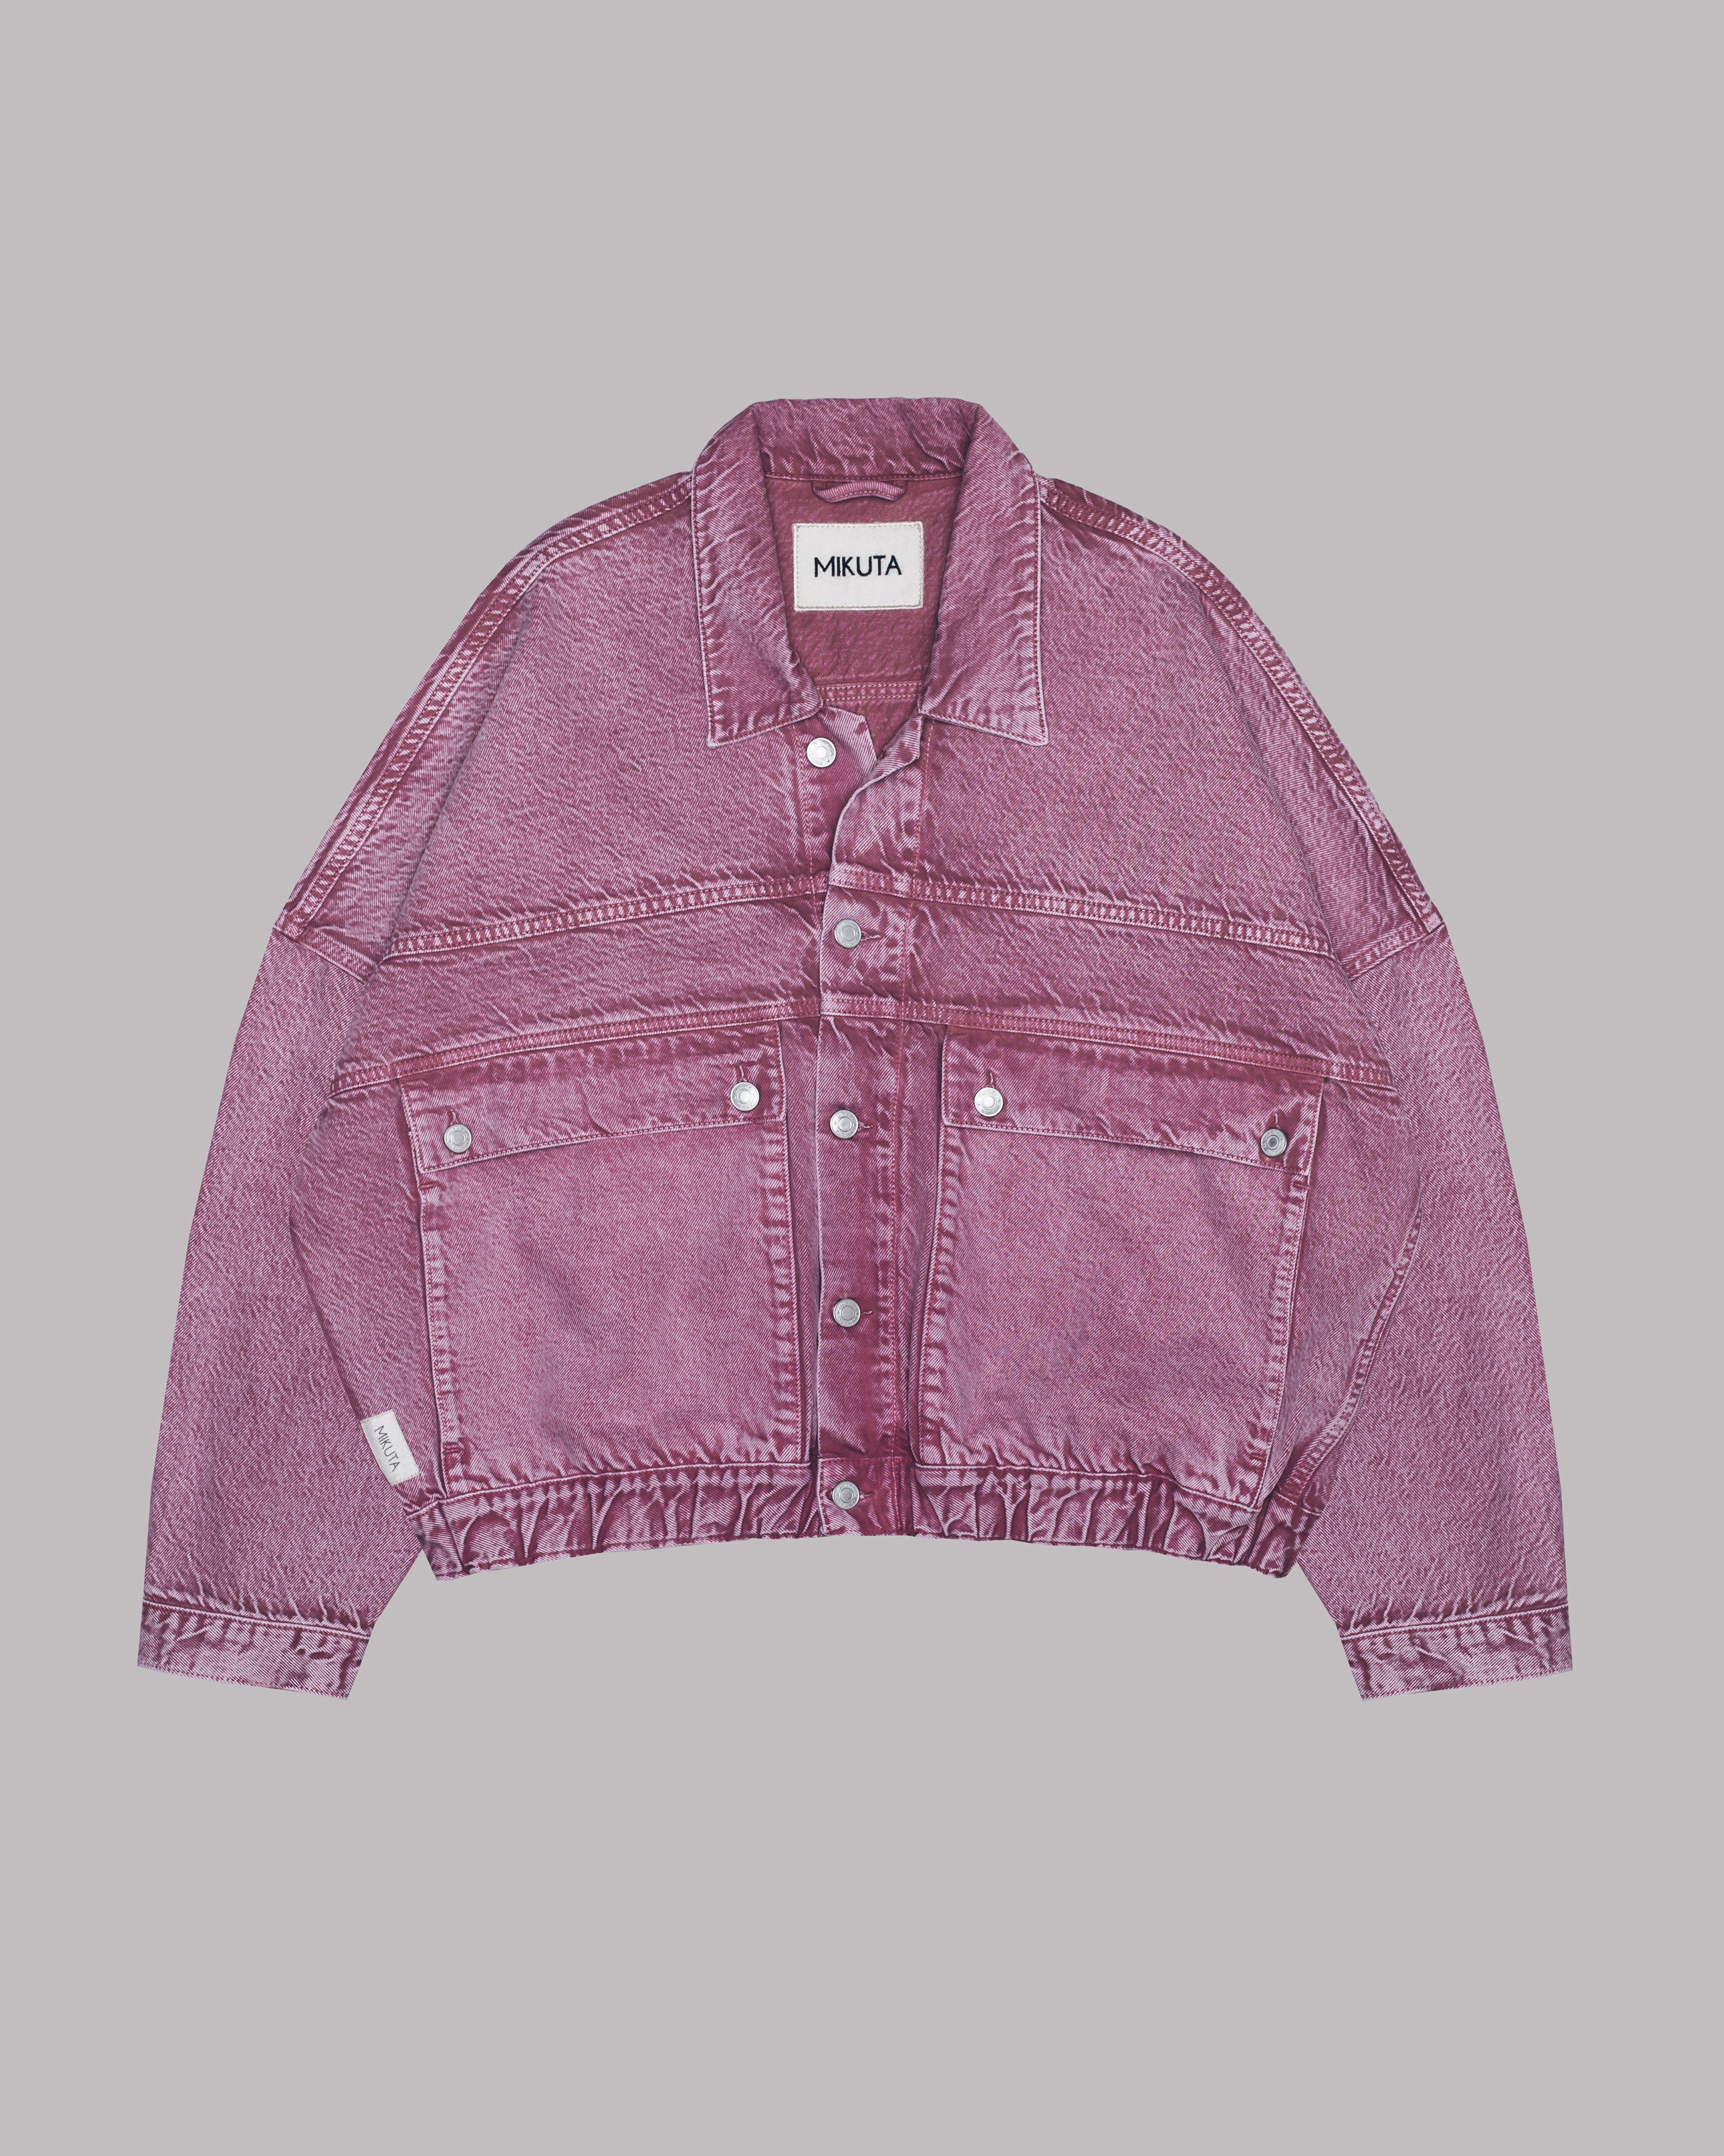 The Pink Faded Denim Jacket